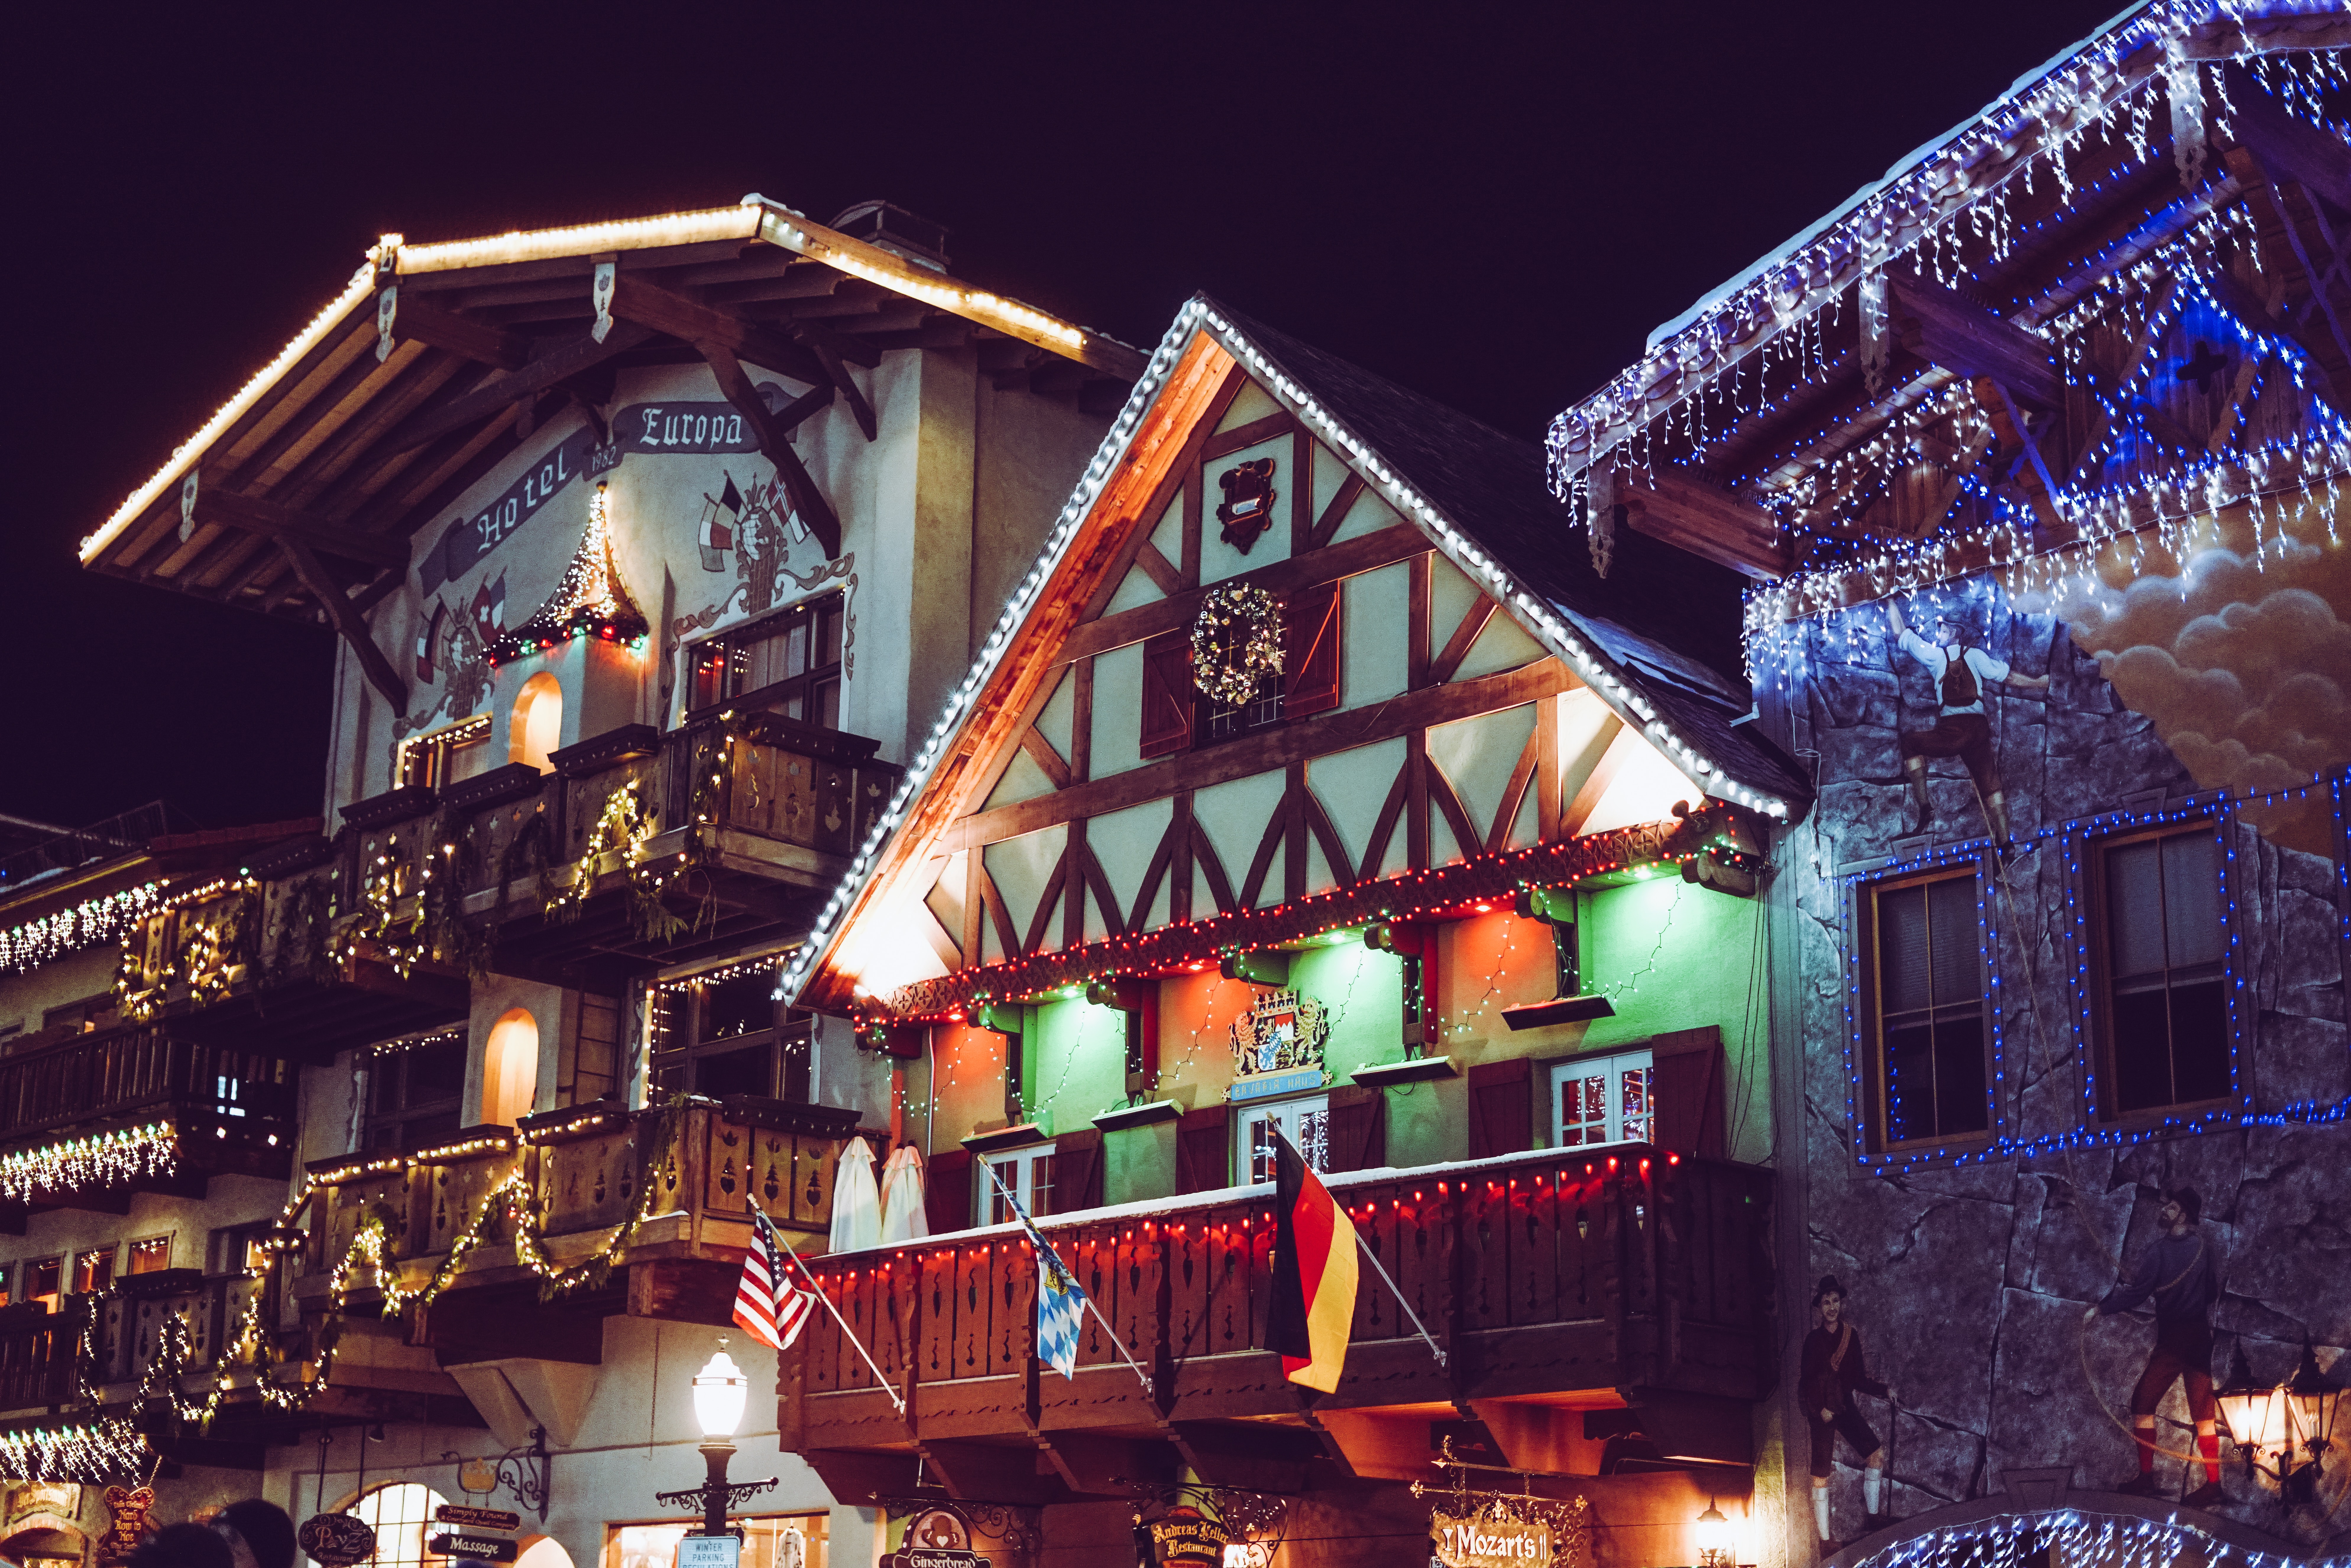 Leavenworth is very exciting town during the holiday season. Check out these festive events and activities. 
pictured: the buildings of Leavenworth all lit up with Christmas lights and decor